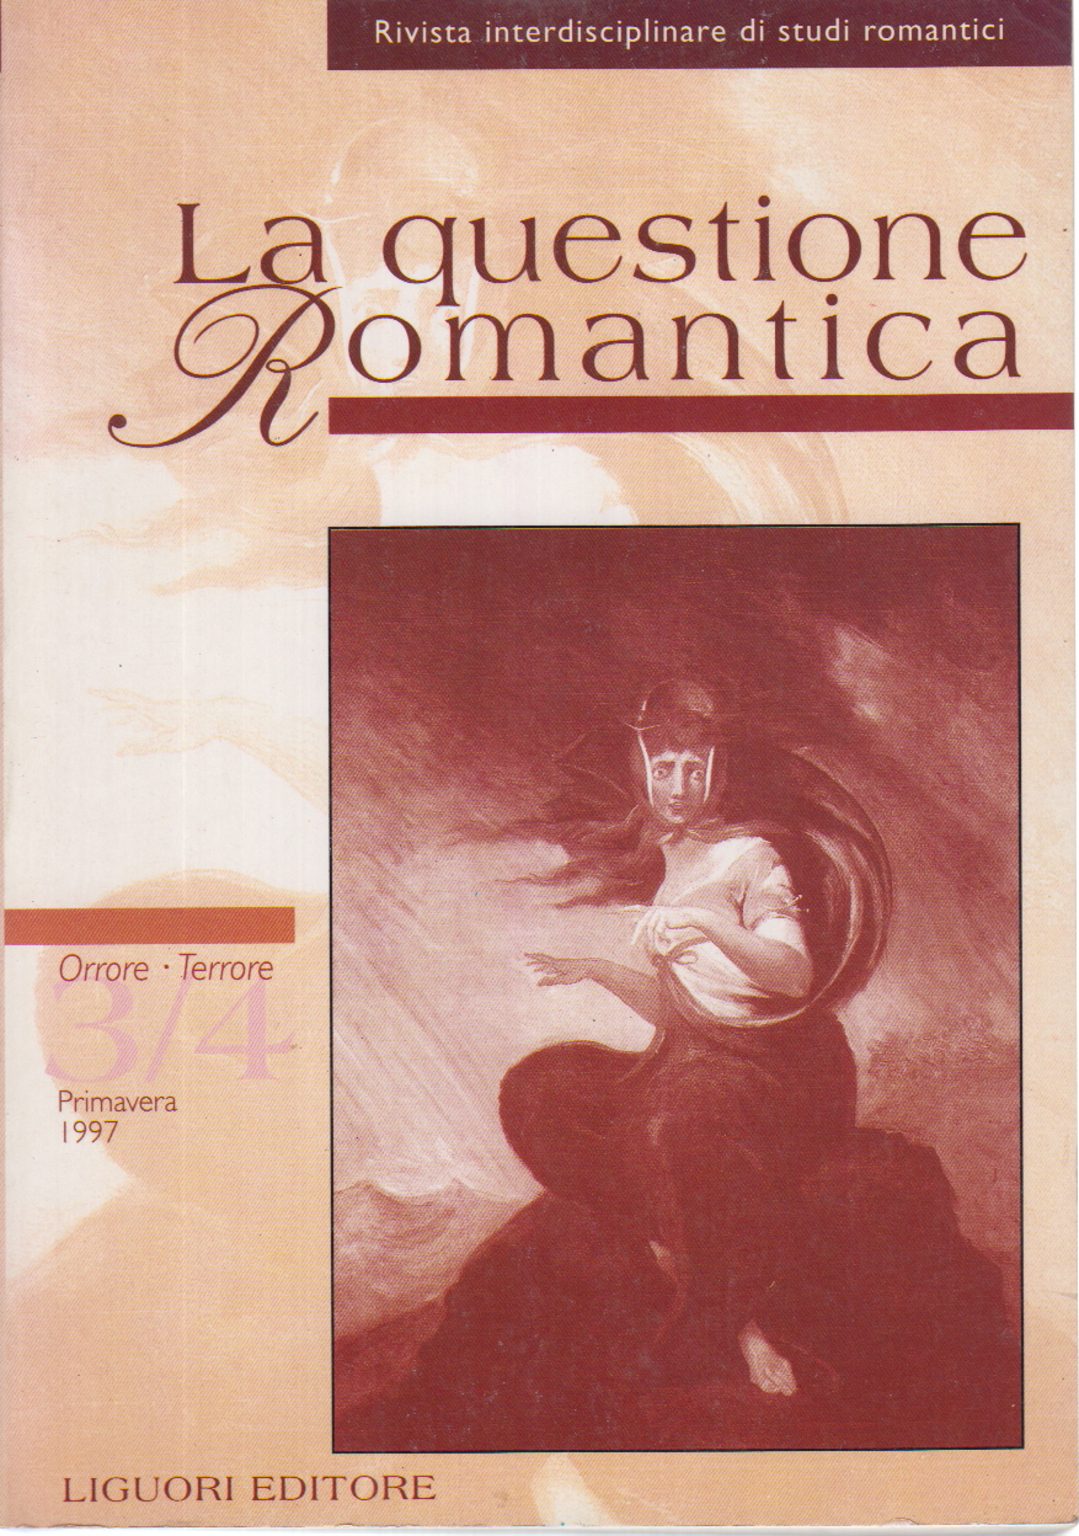 The question Romantic 3/4 - Spring 1997, AA.VV